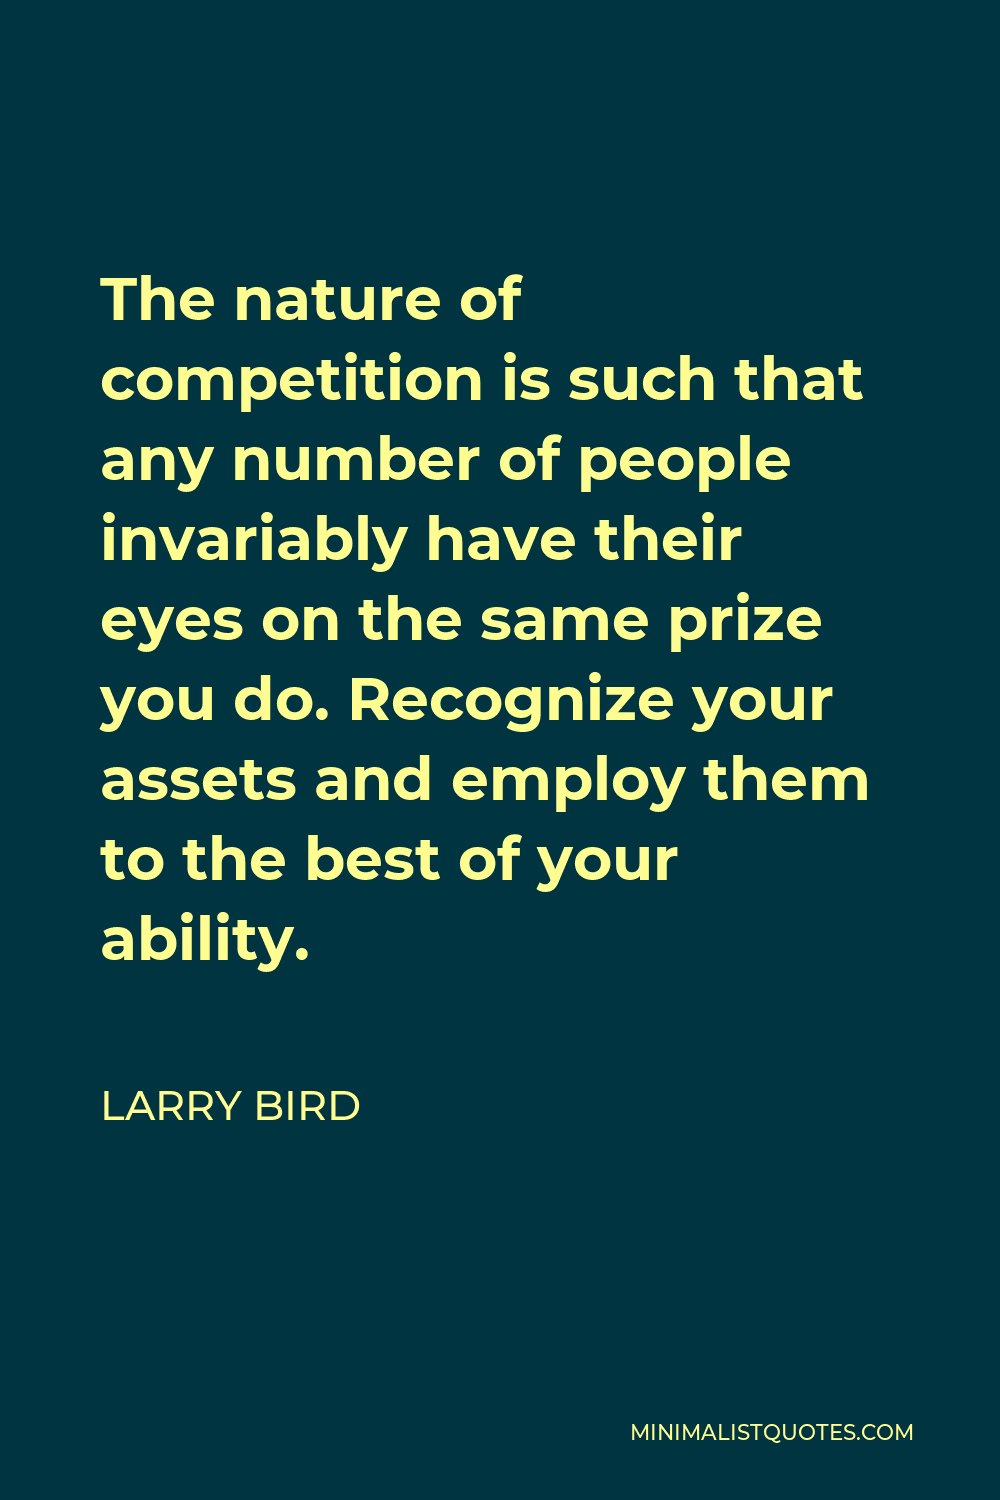 Larry Bird Quote - The nature of competition is such that any number of people invariably have their eyes on the same prize you do. Recognize your assets and employ them to the best of your ability.